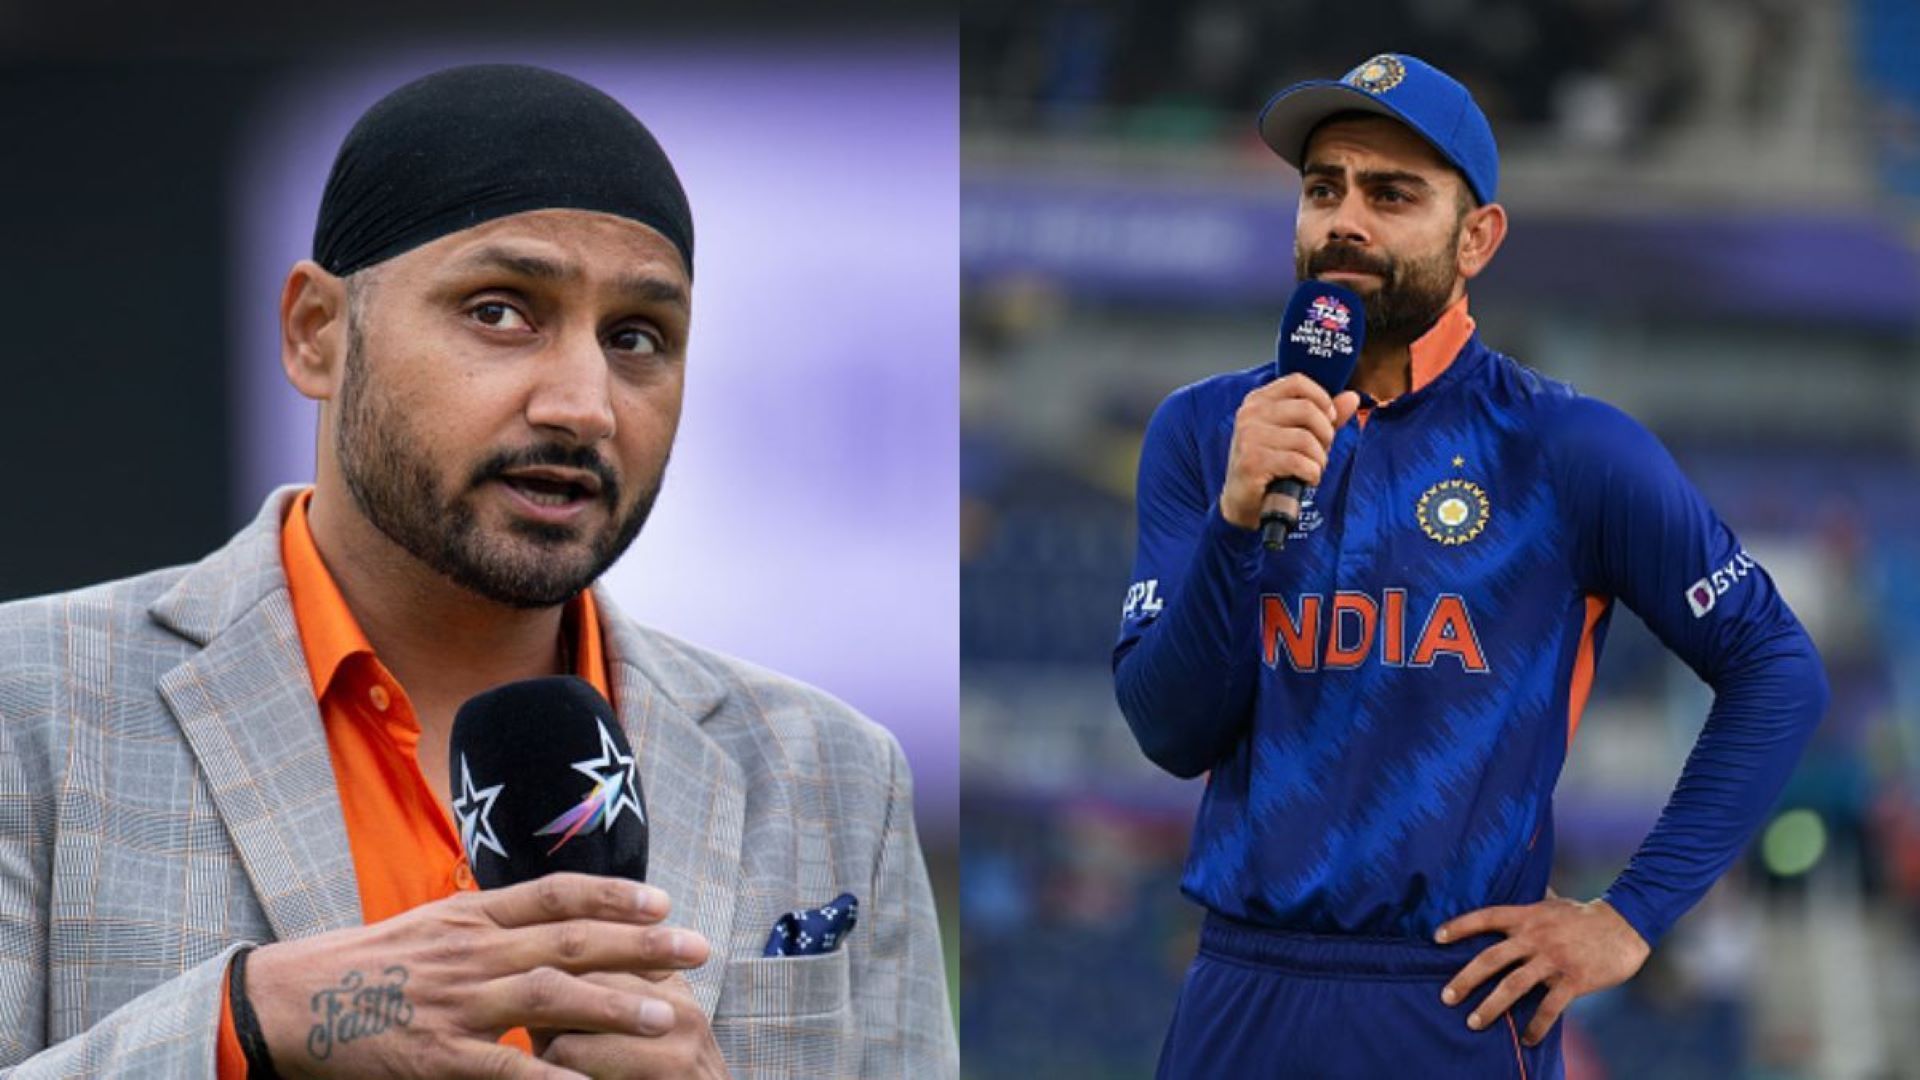 Harbhajan Singh played with Virat Kohli for India in the early stages of his career